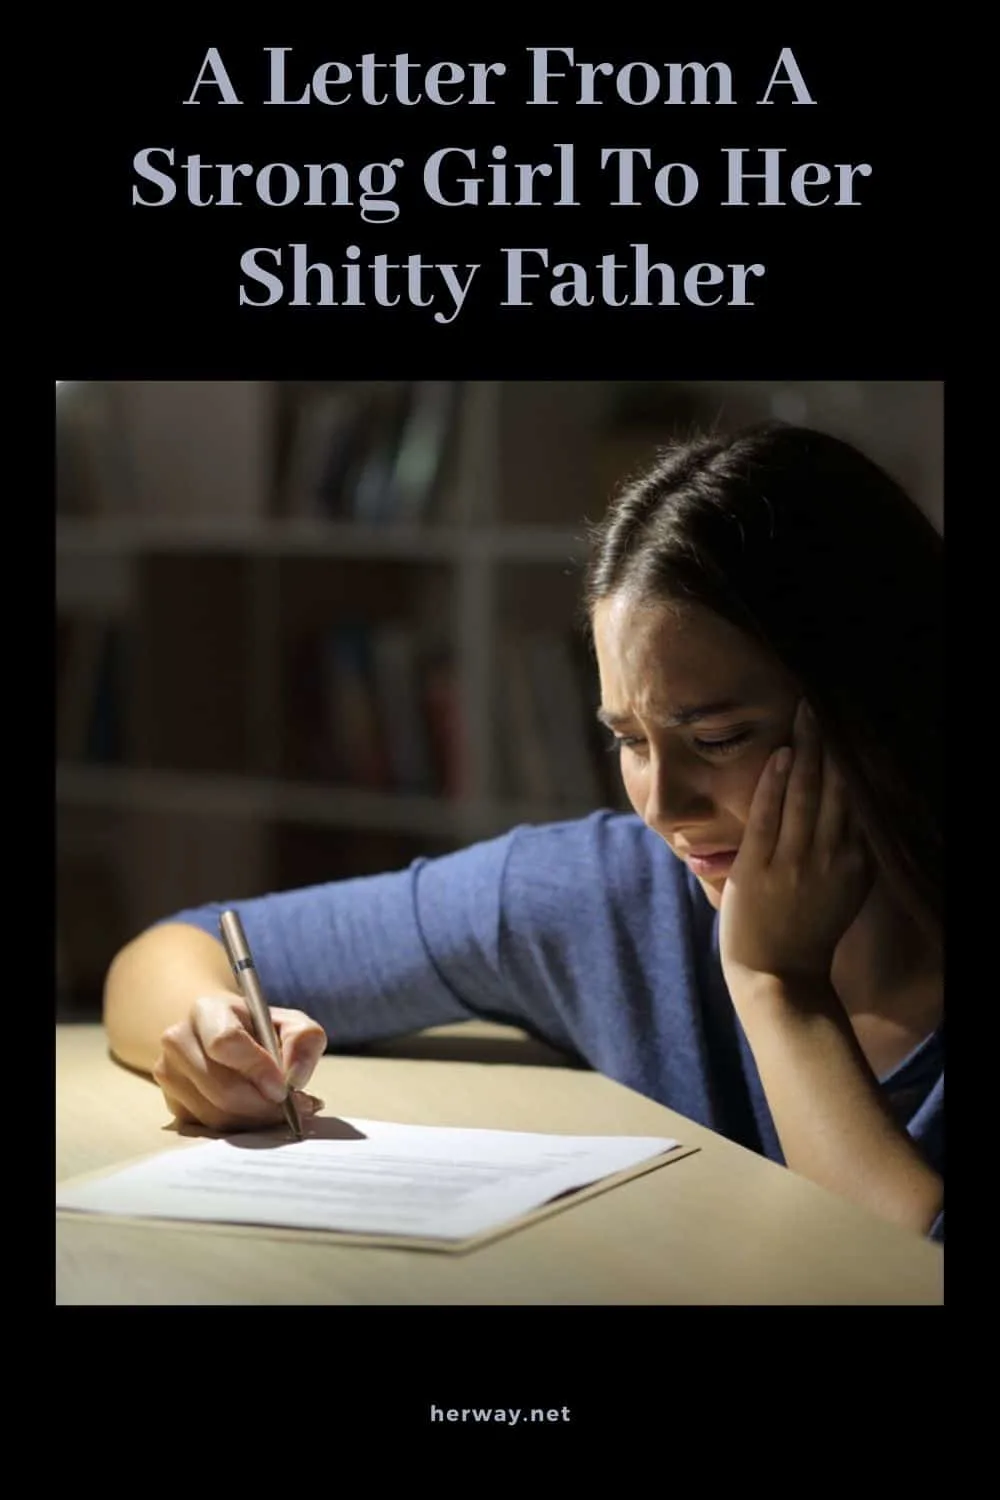 A Letter From A Strong Girl To Her Shitty Father